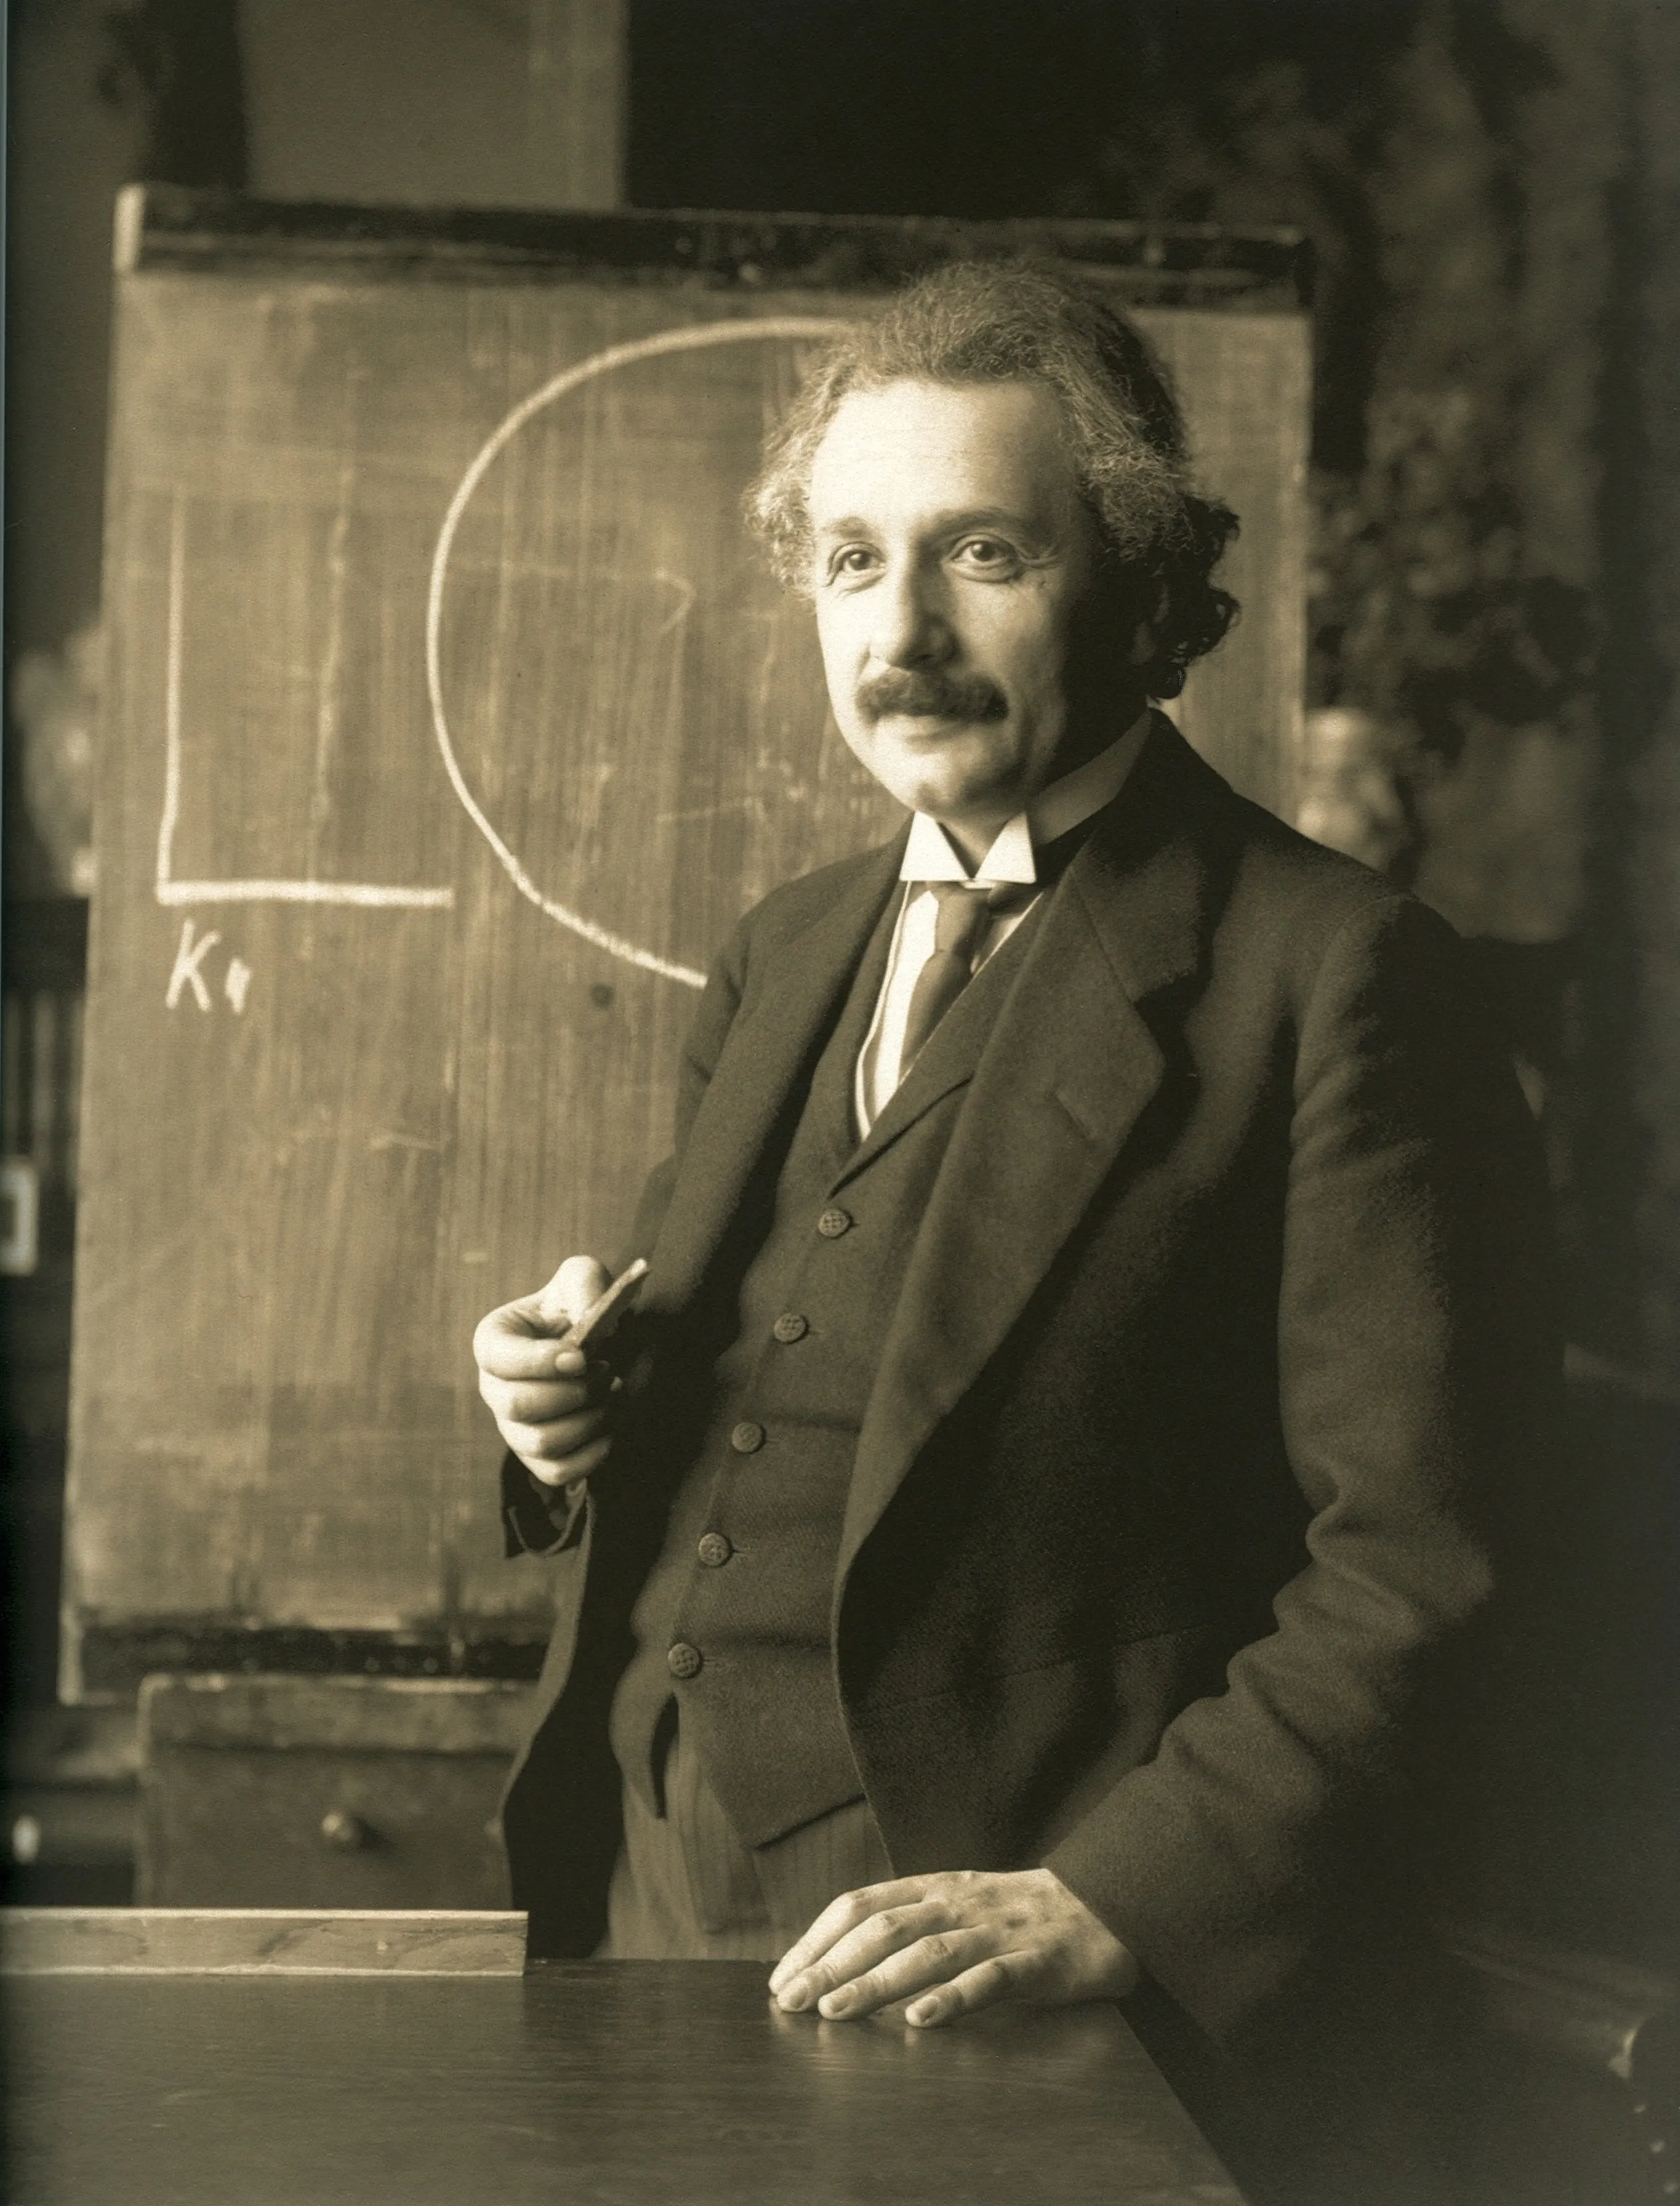 Picture of Albert Einstein from 1921 in front of a chalkboard